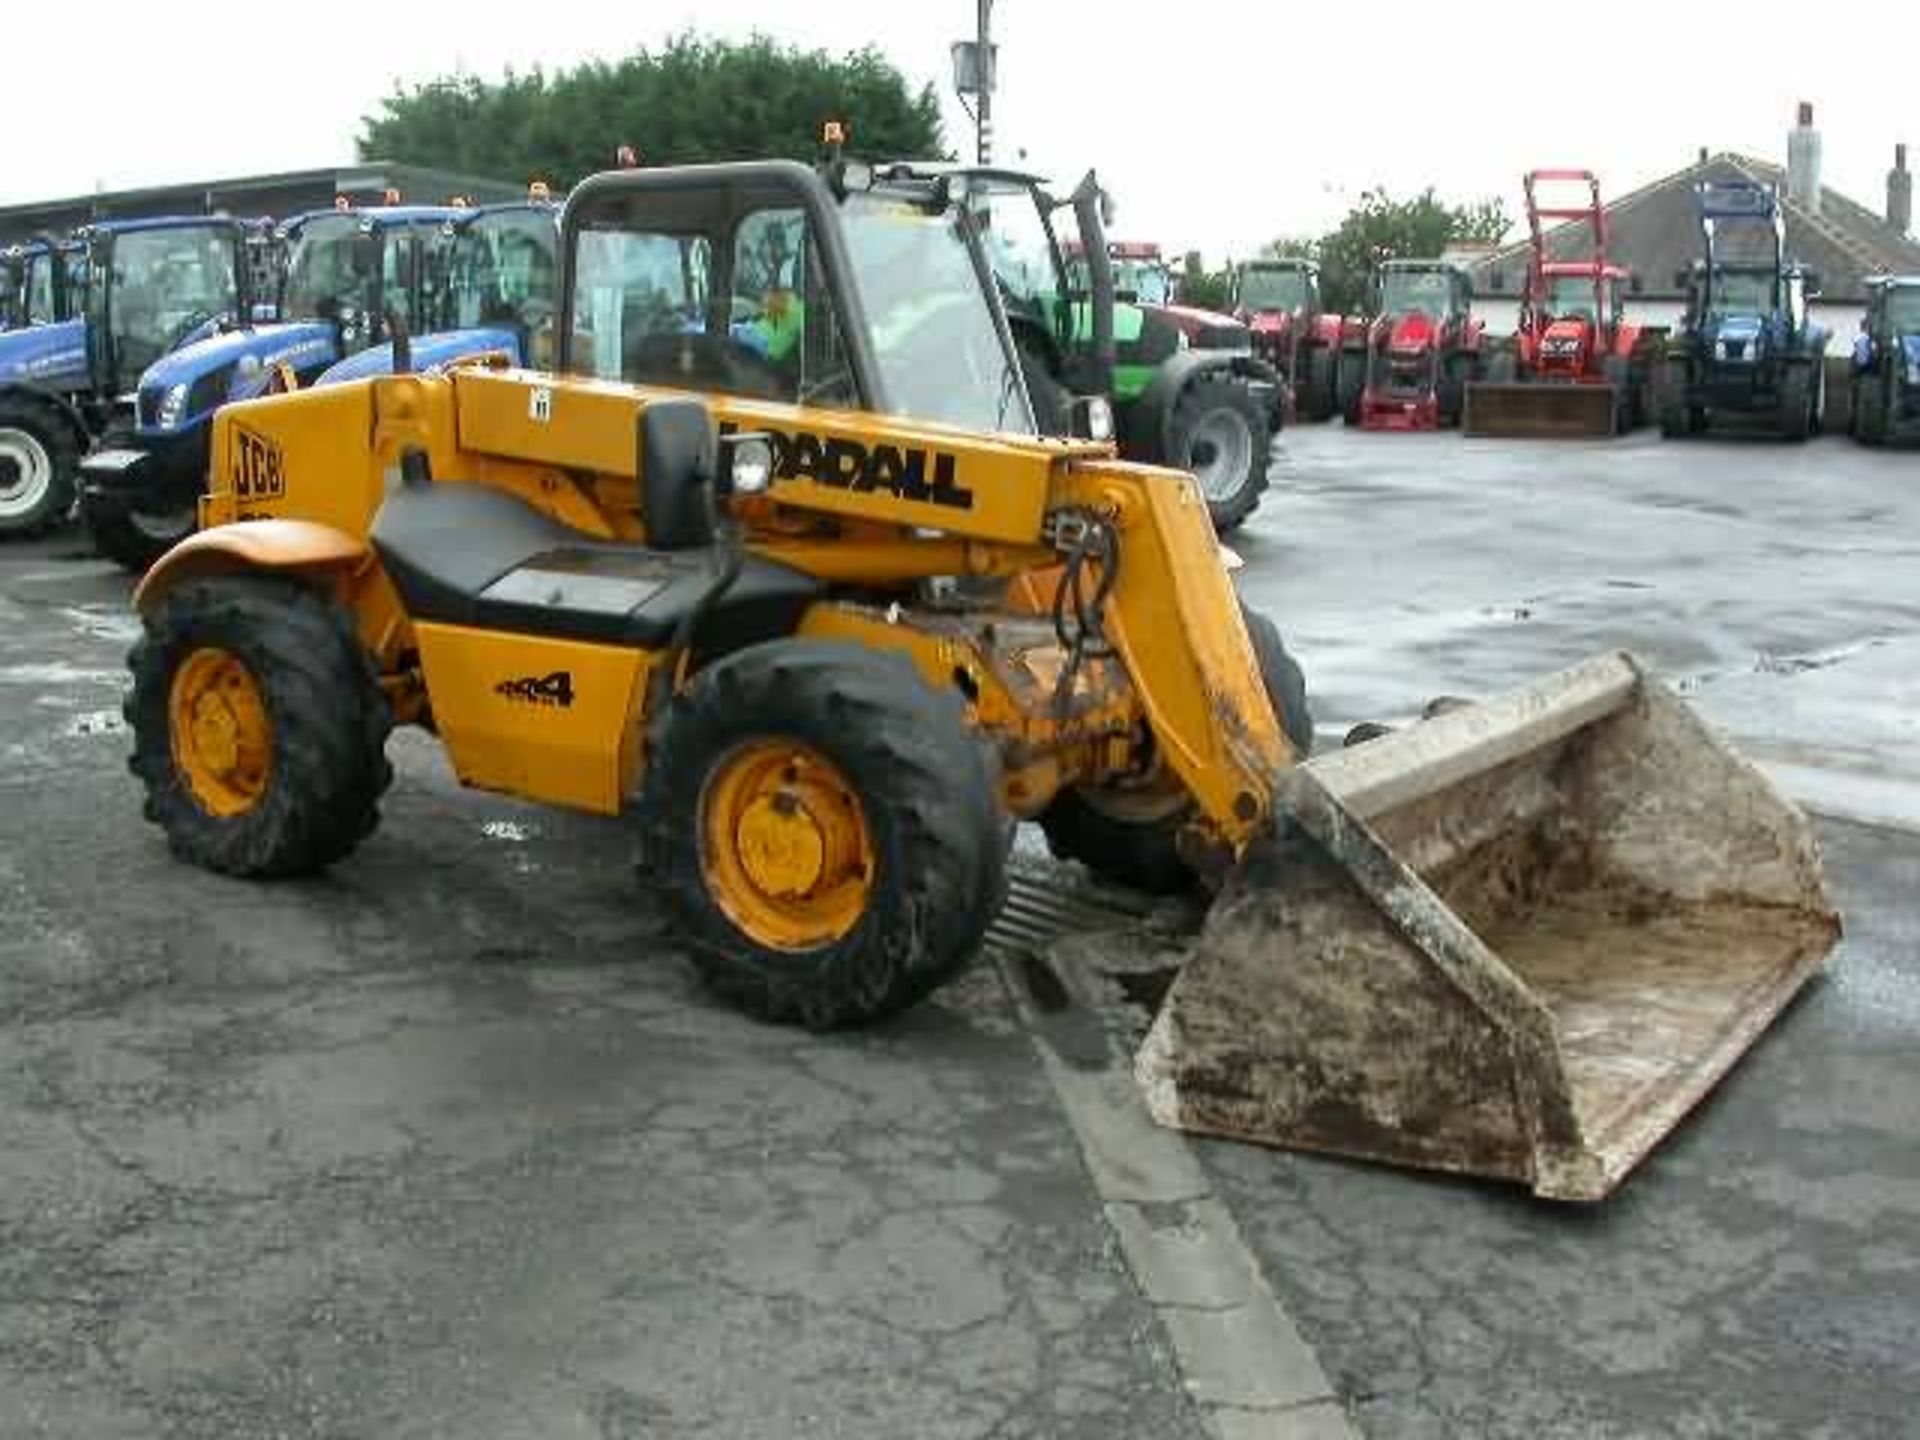 1996 Case JCB 526/55 with Bucket - Image 2 of 5